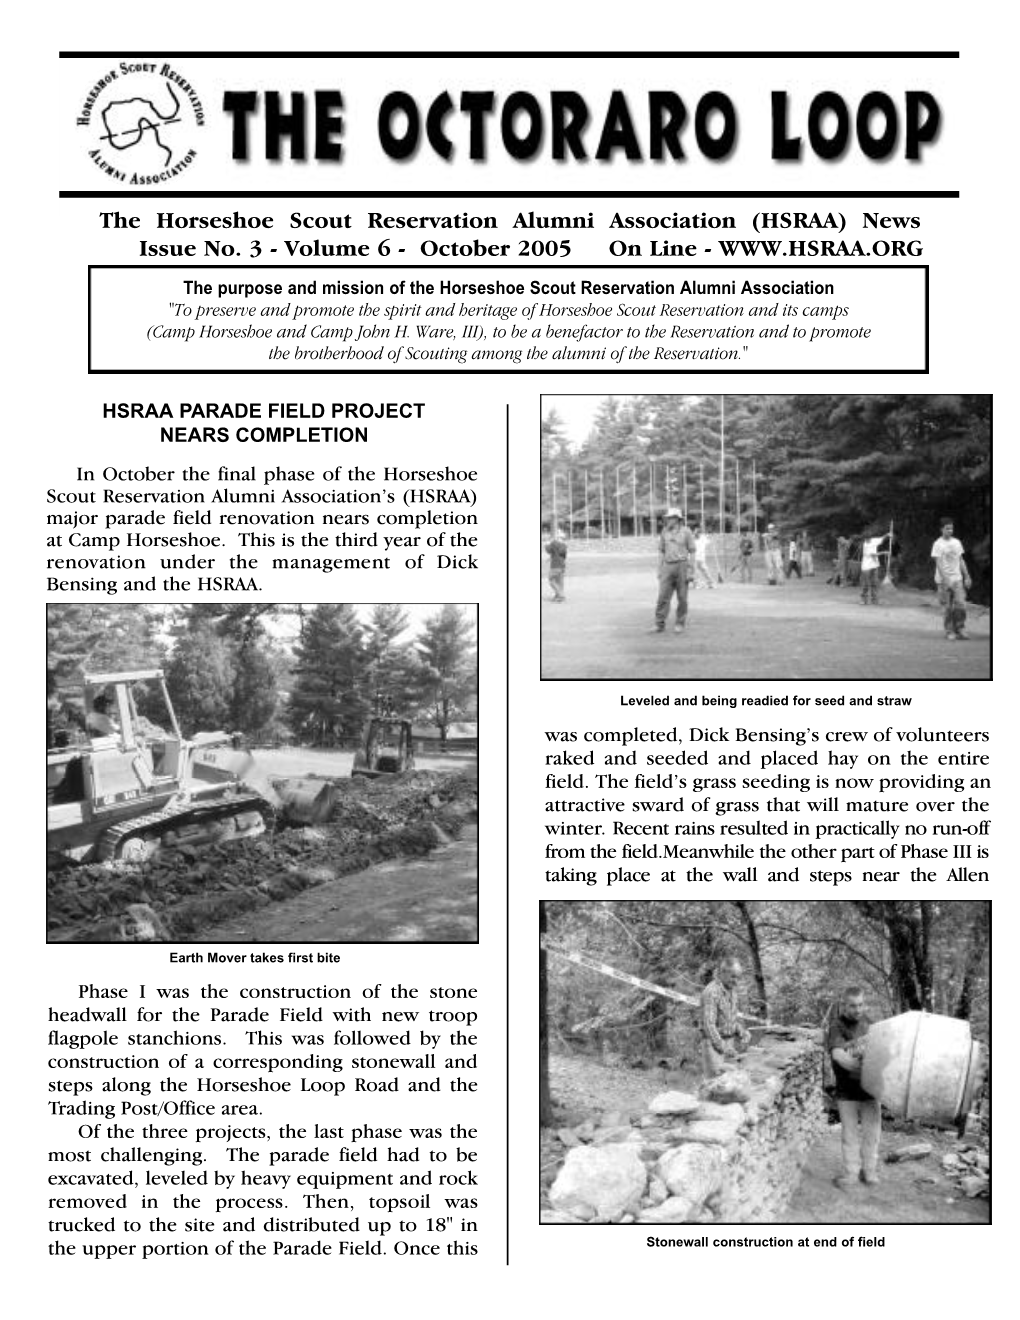 The Horseshoe Scout Reservation Alumni Association (HSRAA) News Issue No. 3 - Volume 6 - October 2005 on Line